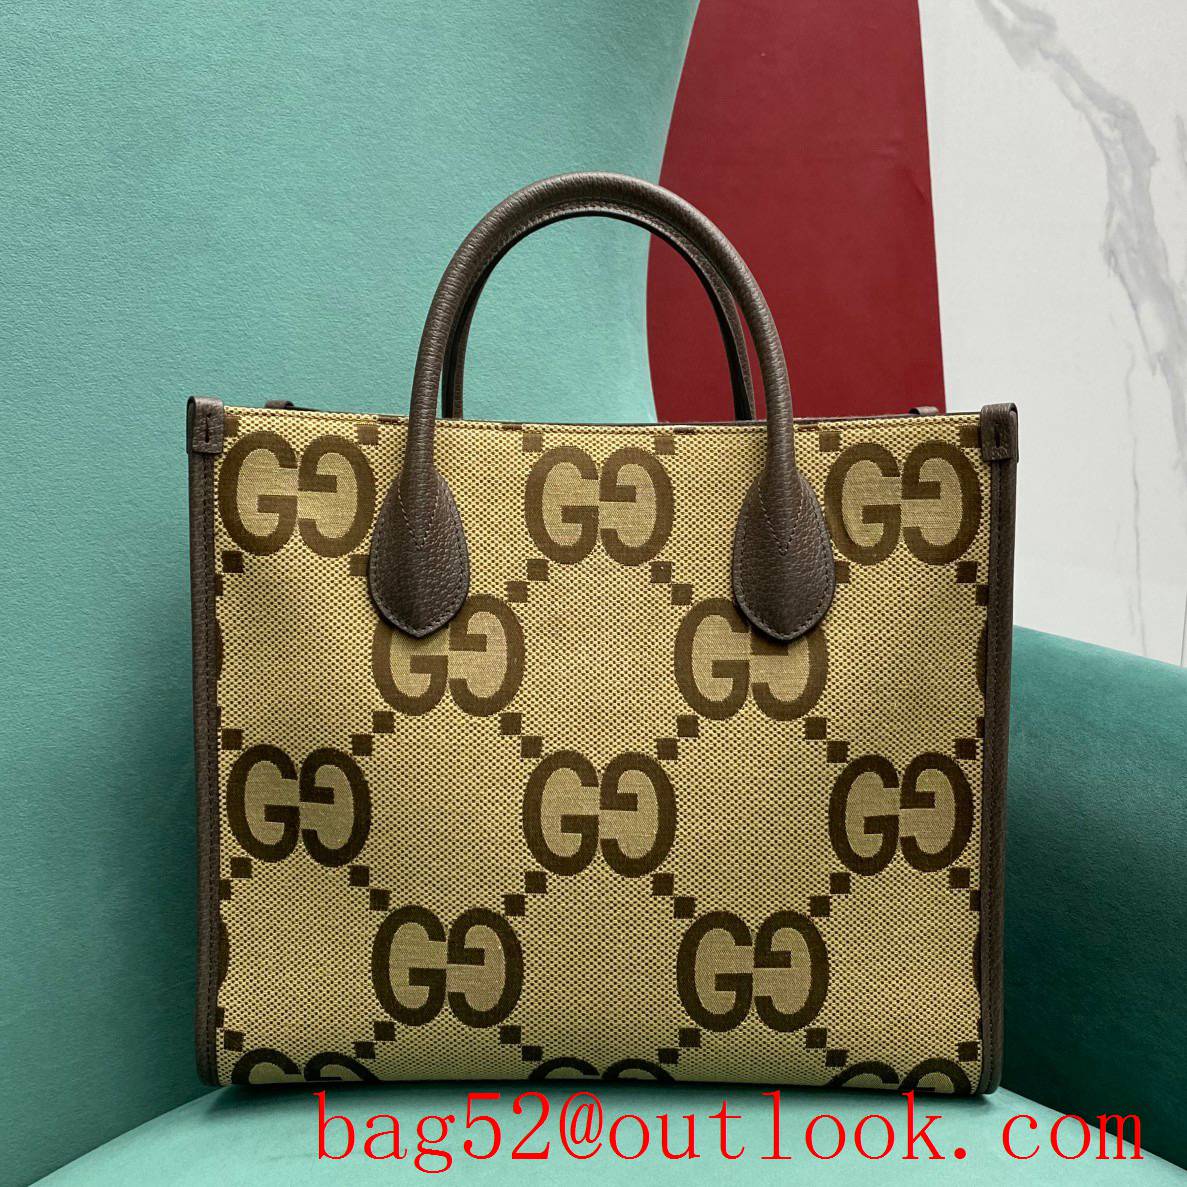 Gucci ophidia chain shoulder large tote brown handbag